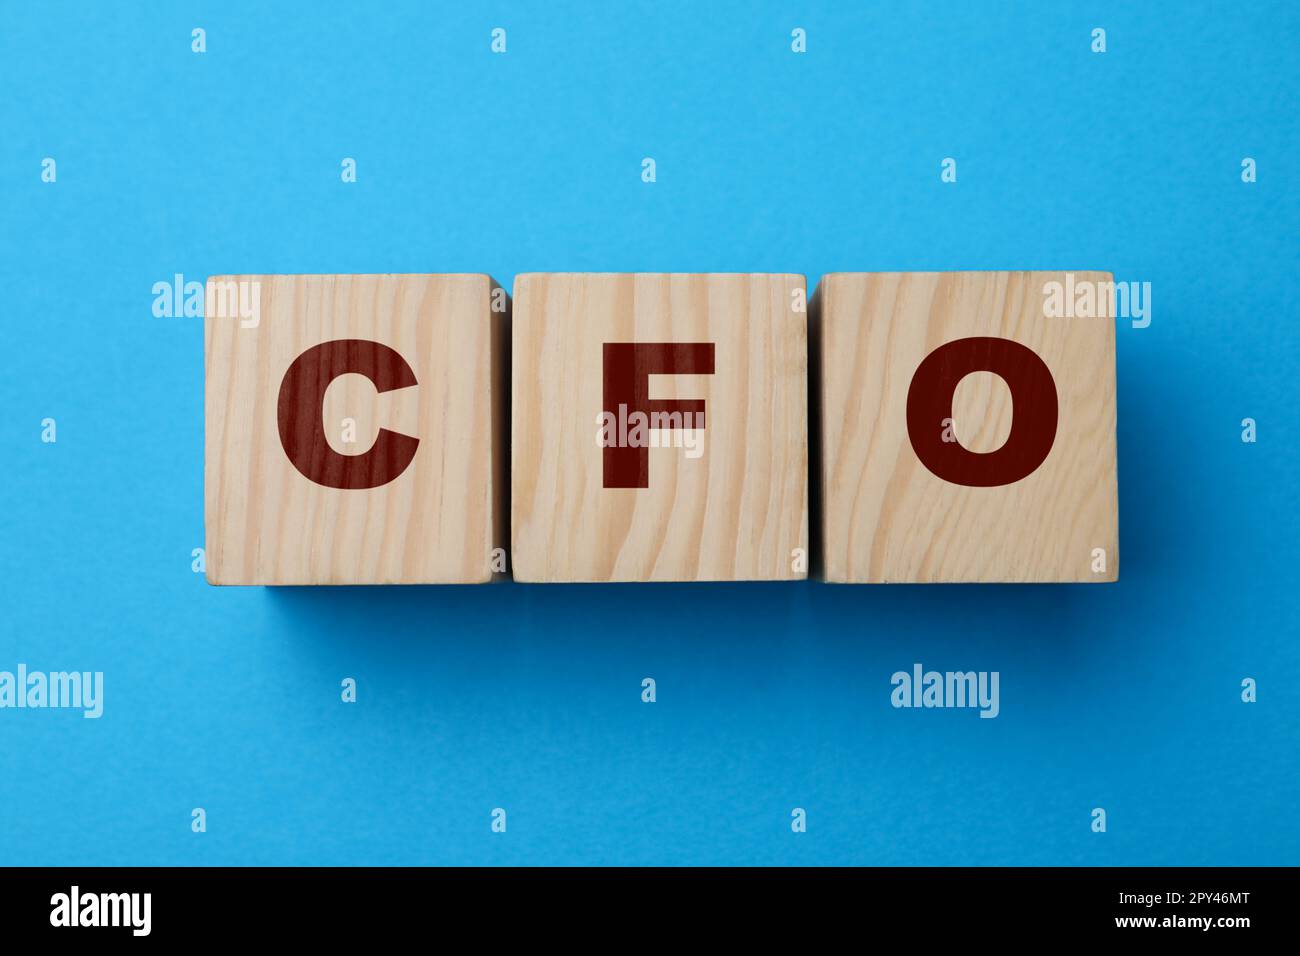 Abbreviation CFO of wooden cubes on blue background, flat lay. Financial management Stock Photo